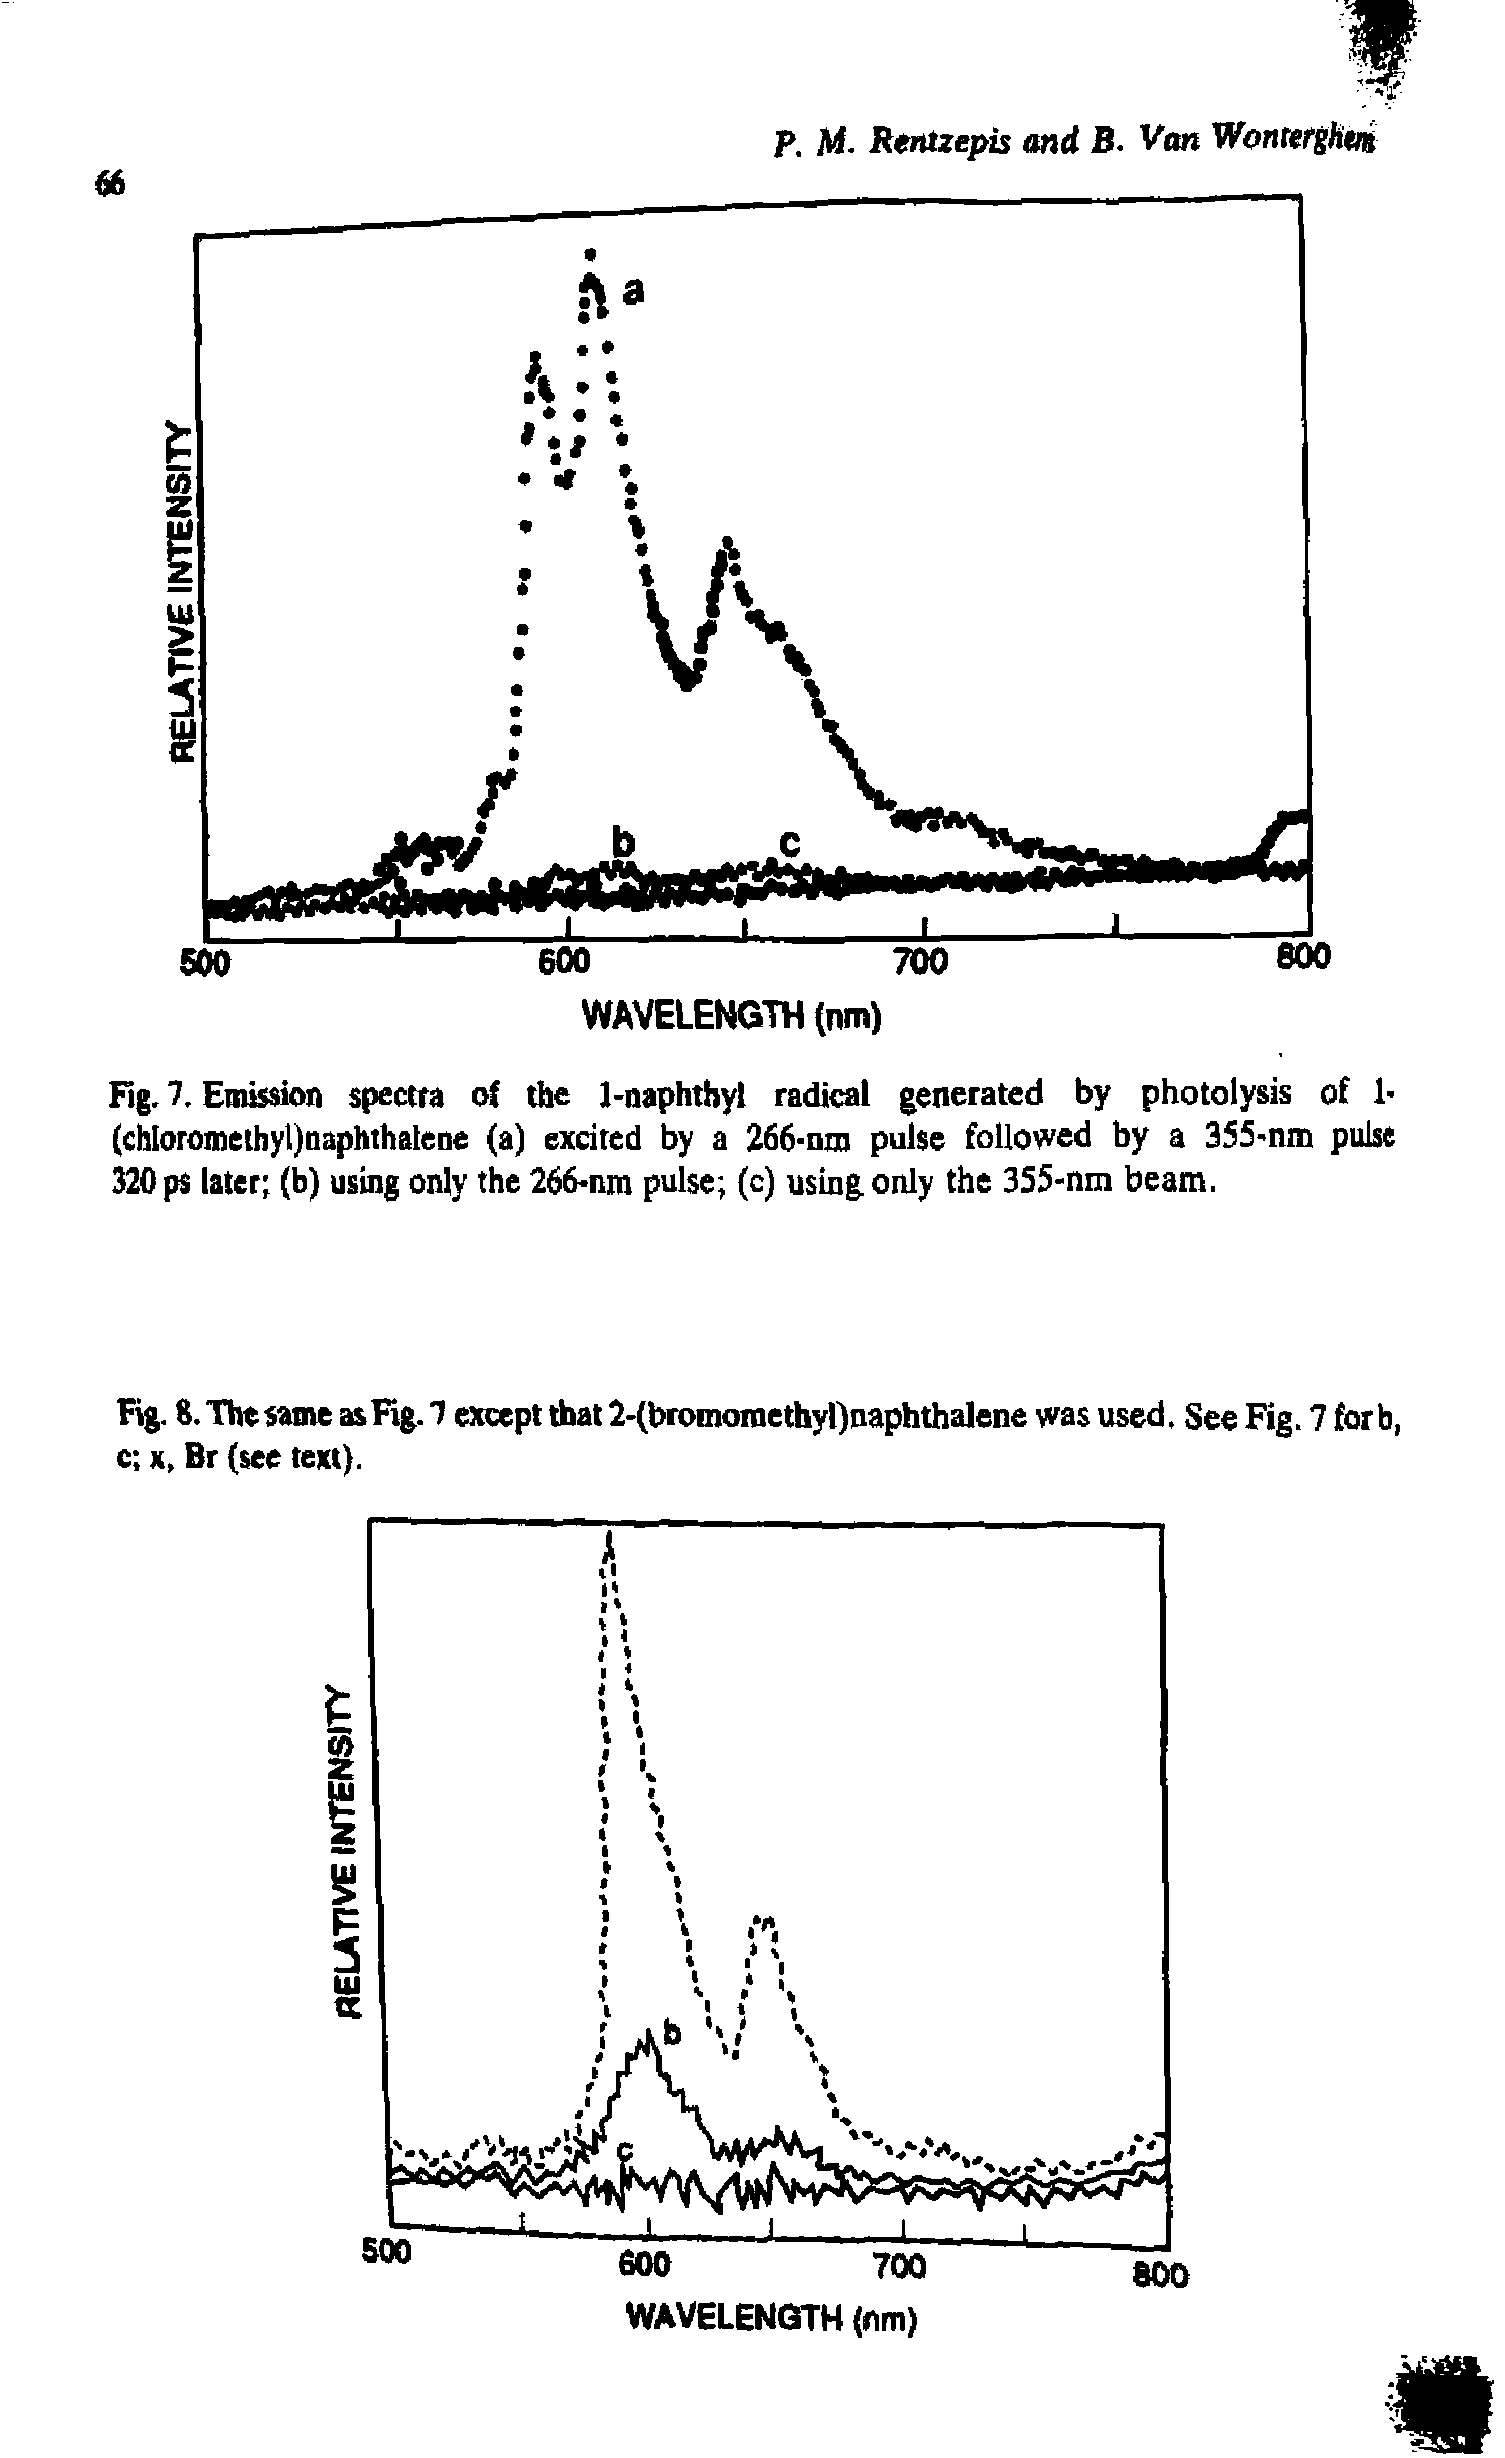 Fig. 7. Enusaion spectra o( the 1-naphthyl radical generated by photolysis of 1< (chloromethyOnaphthelene (a) excited by a 266-did pulse followed by a 355-nm pulse ko ps later (b) using only the 266-nm pulse (c) using only the 3S5-nm beam.